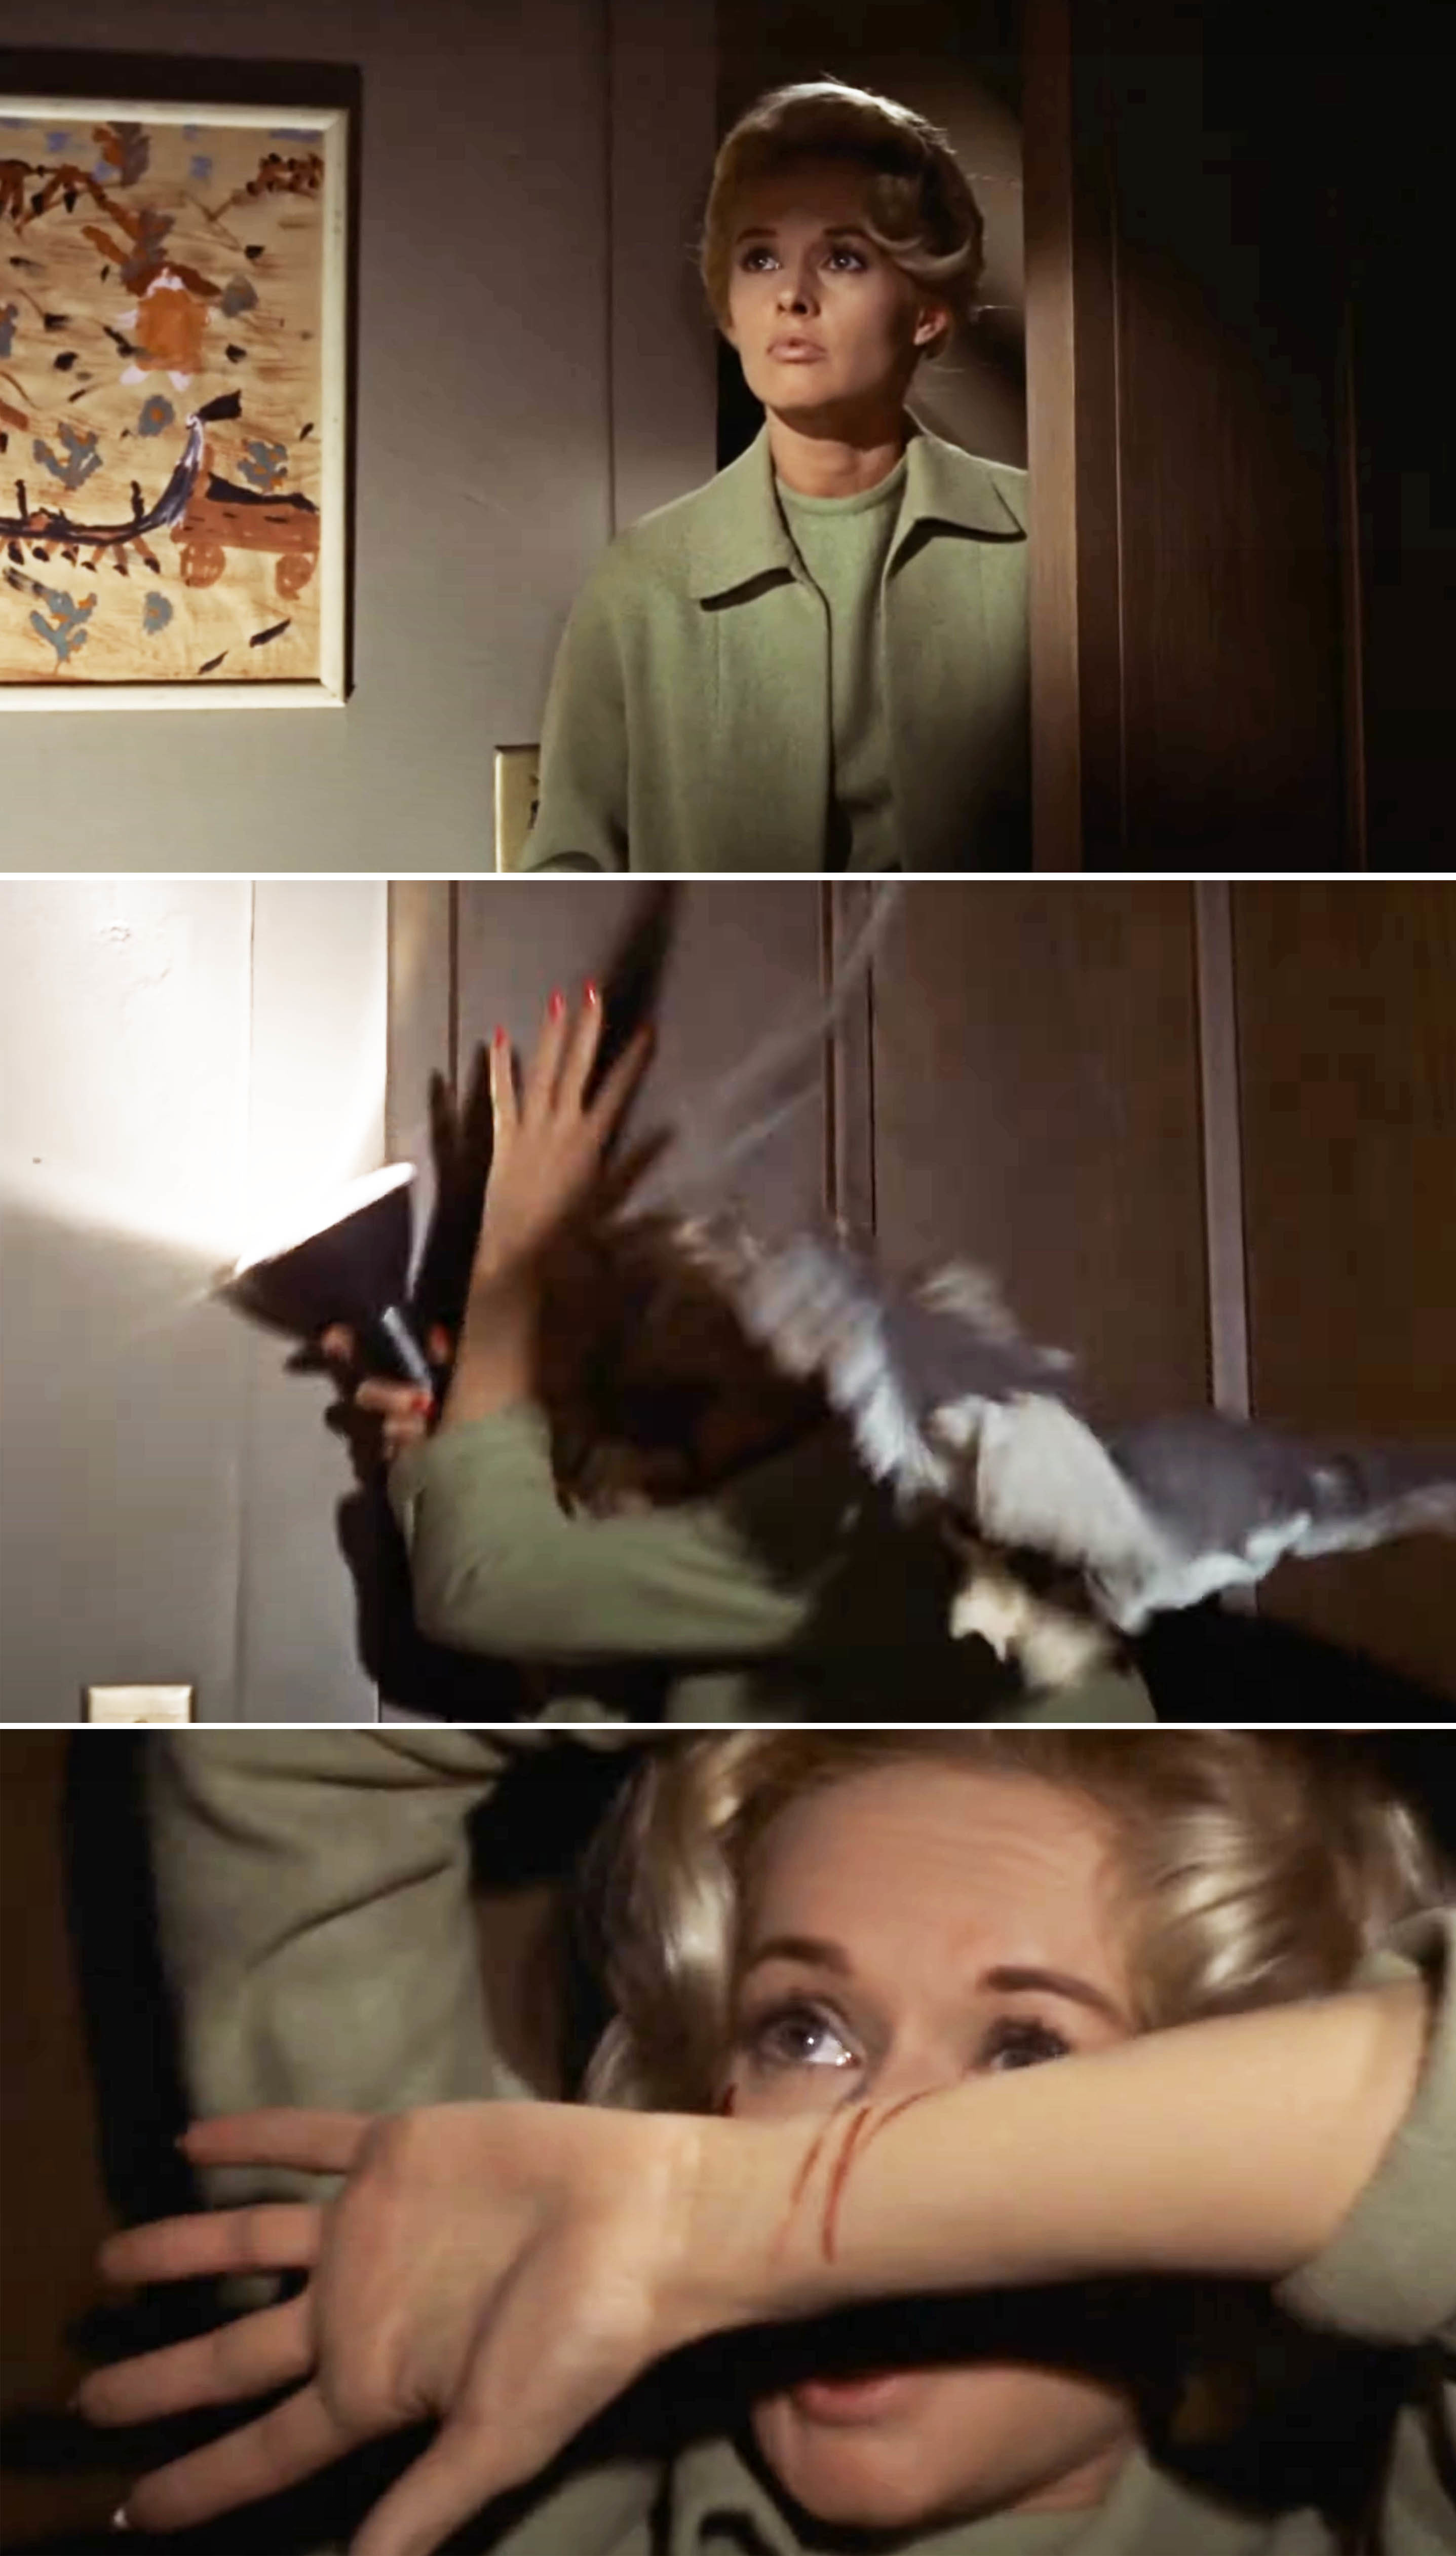 Three-panel collage from &quot;The Birds&quot; featuring Tippi Hedren in suspenseful scenes with attacking birds